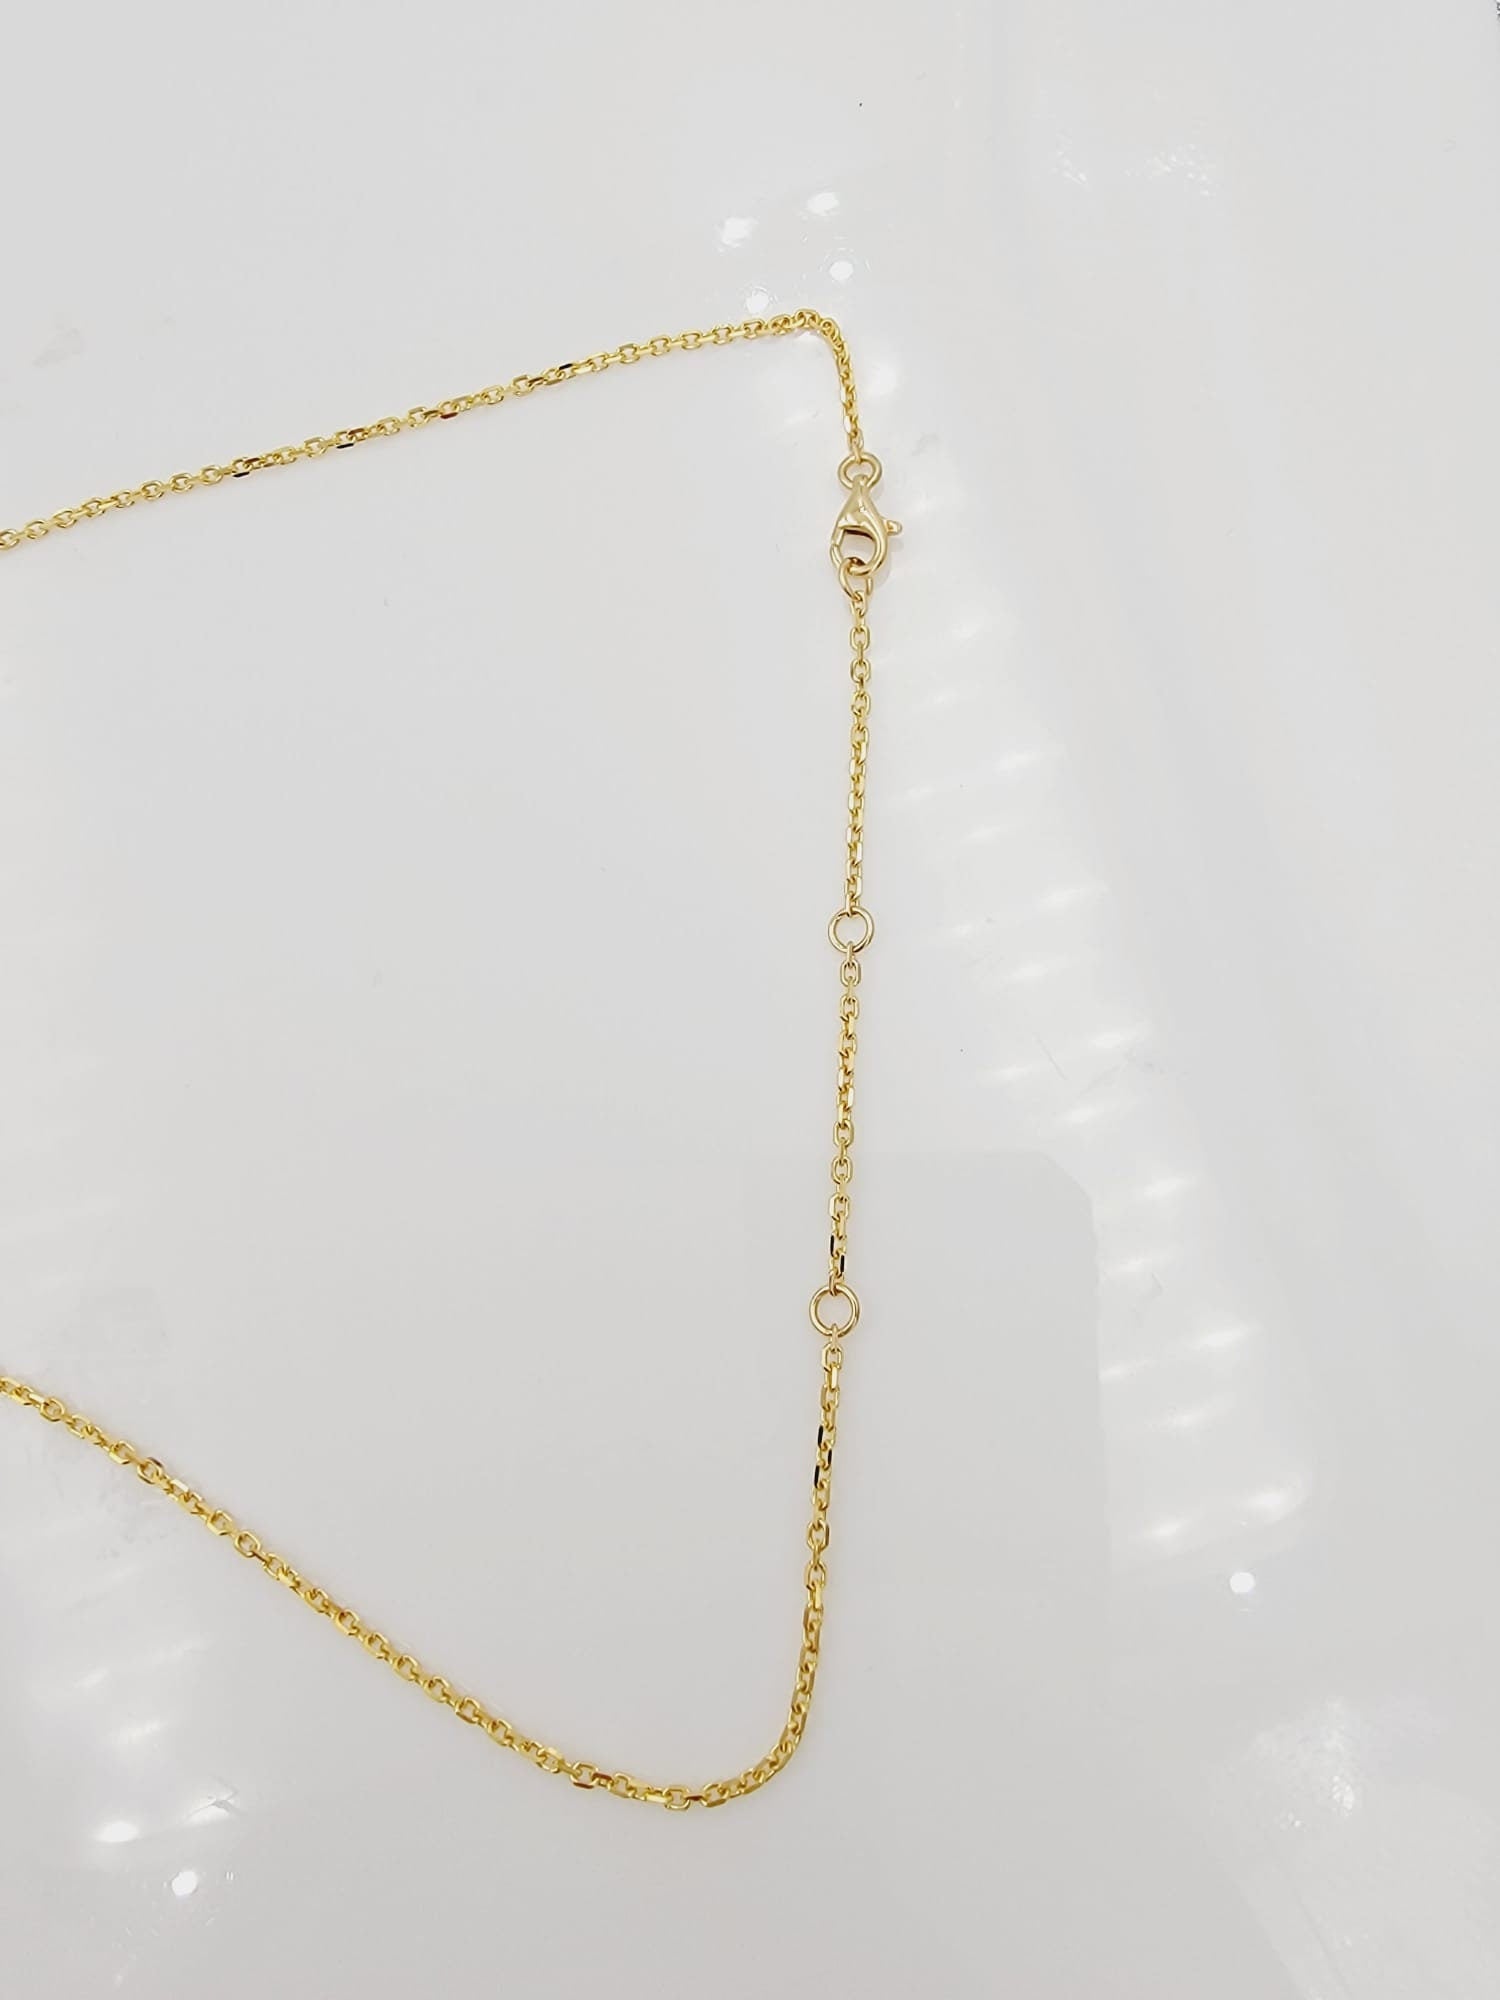 18k Yellow Gold Smile Bar Diamond Necklace Gift For Her